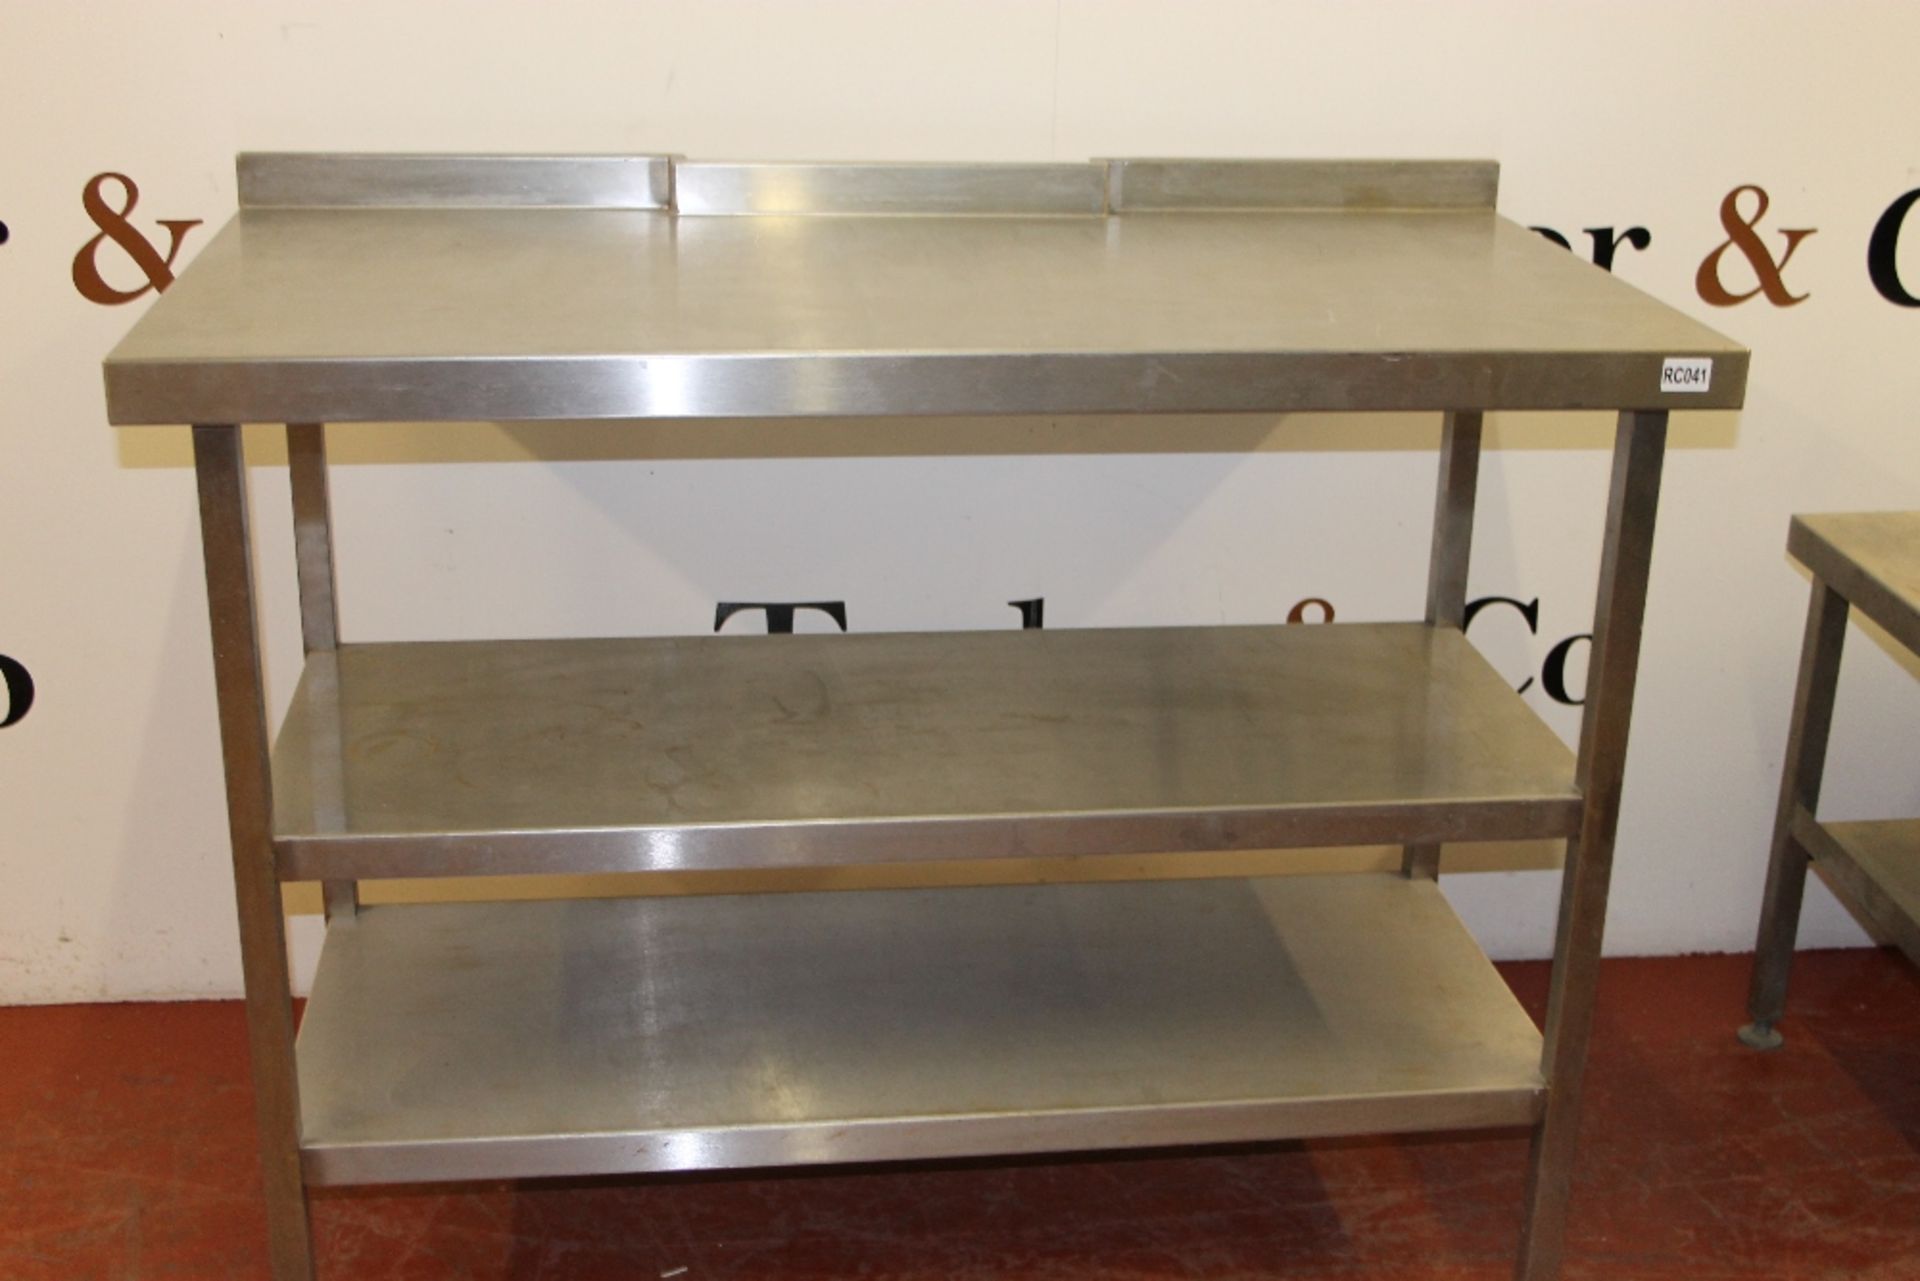 Stainless Steel Table with 2 Under Shelves W120cm x H95cm x D62cm - Image 2 of 2